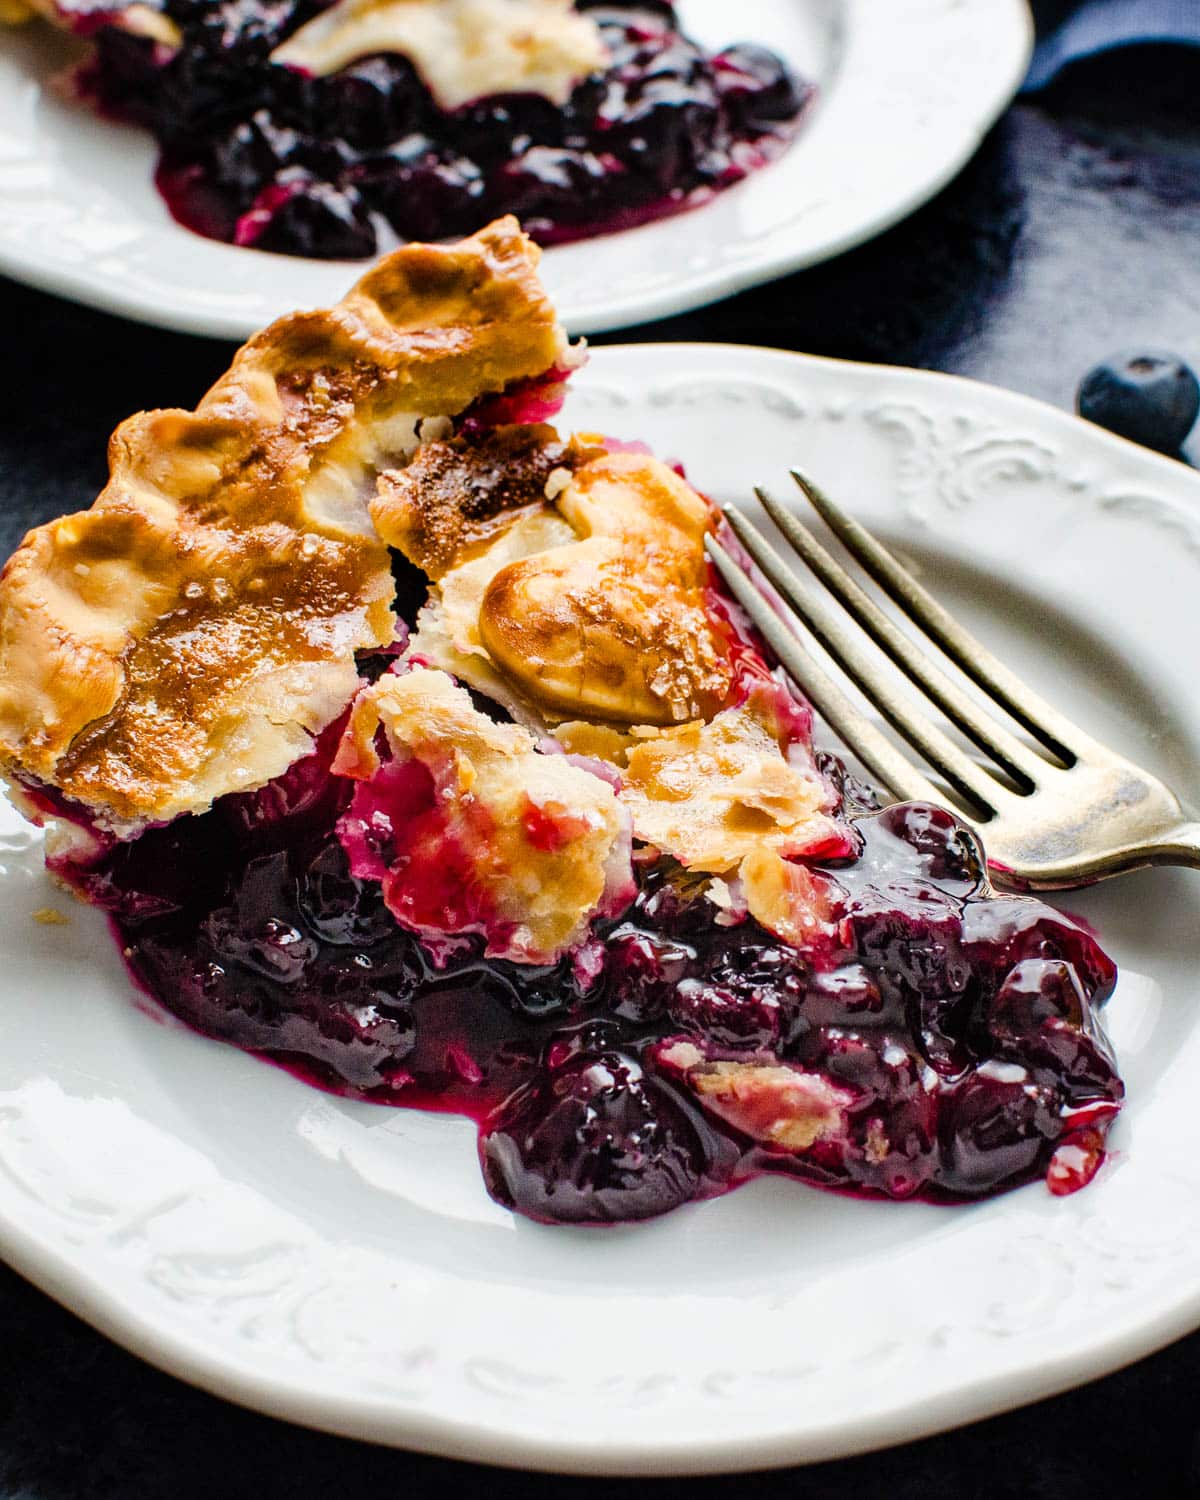 Blueberry pie with a flaky crust.